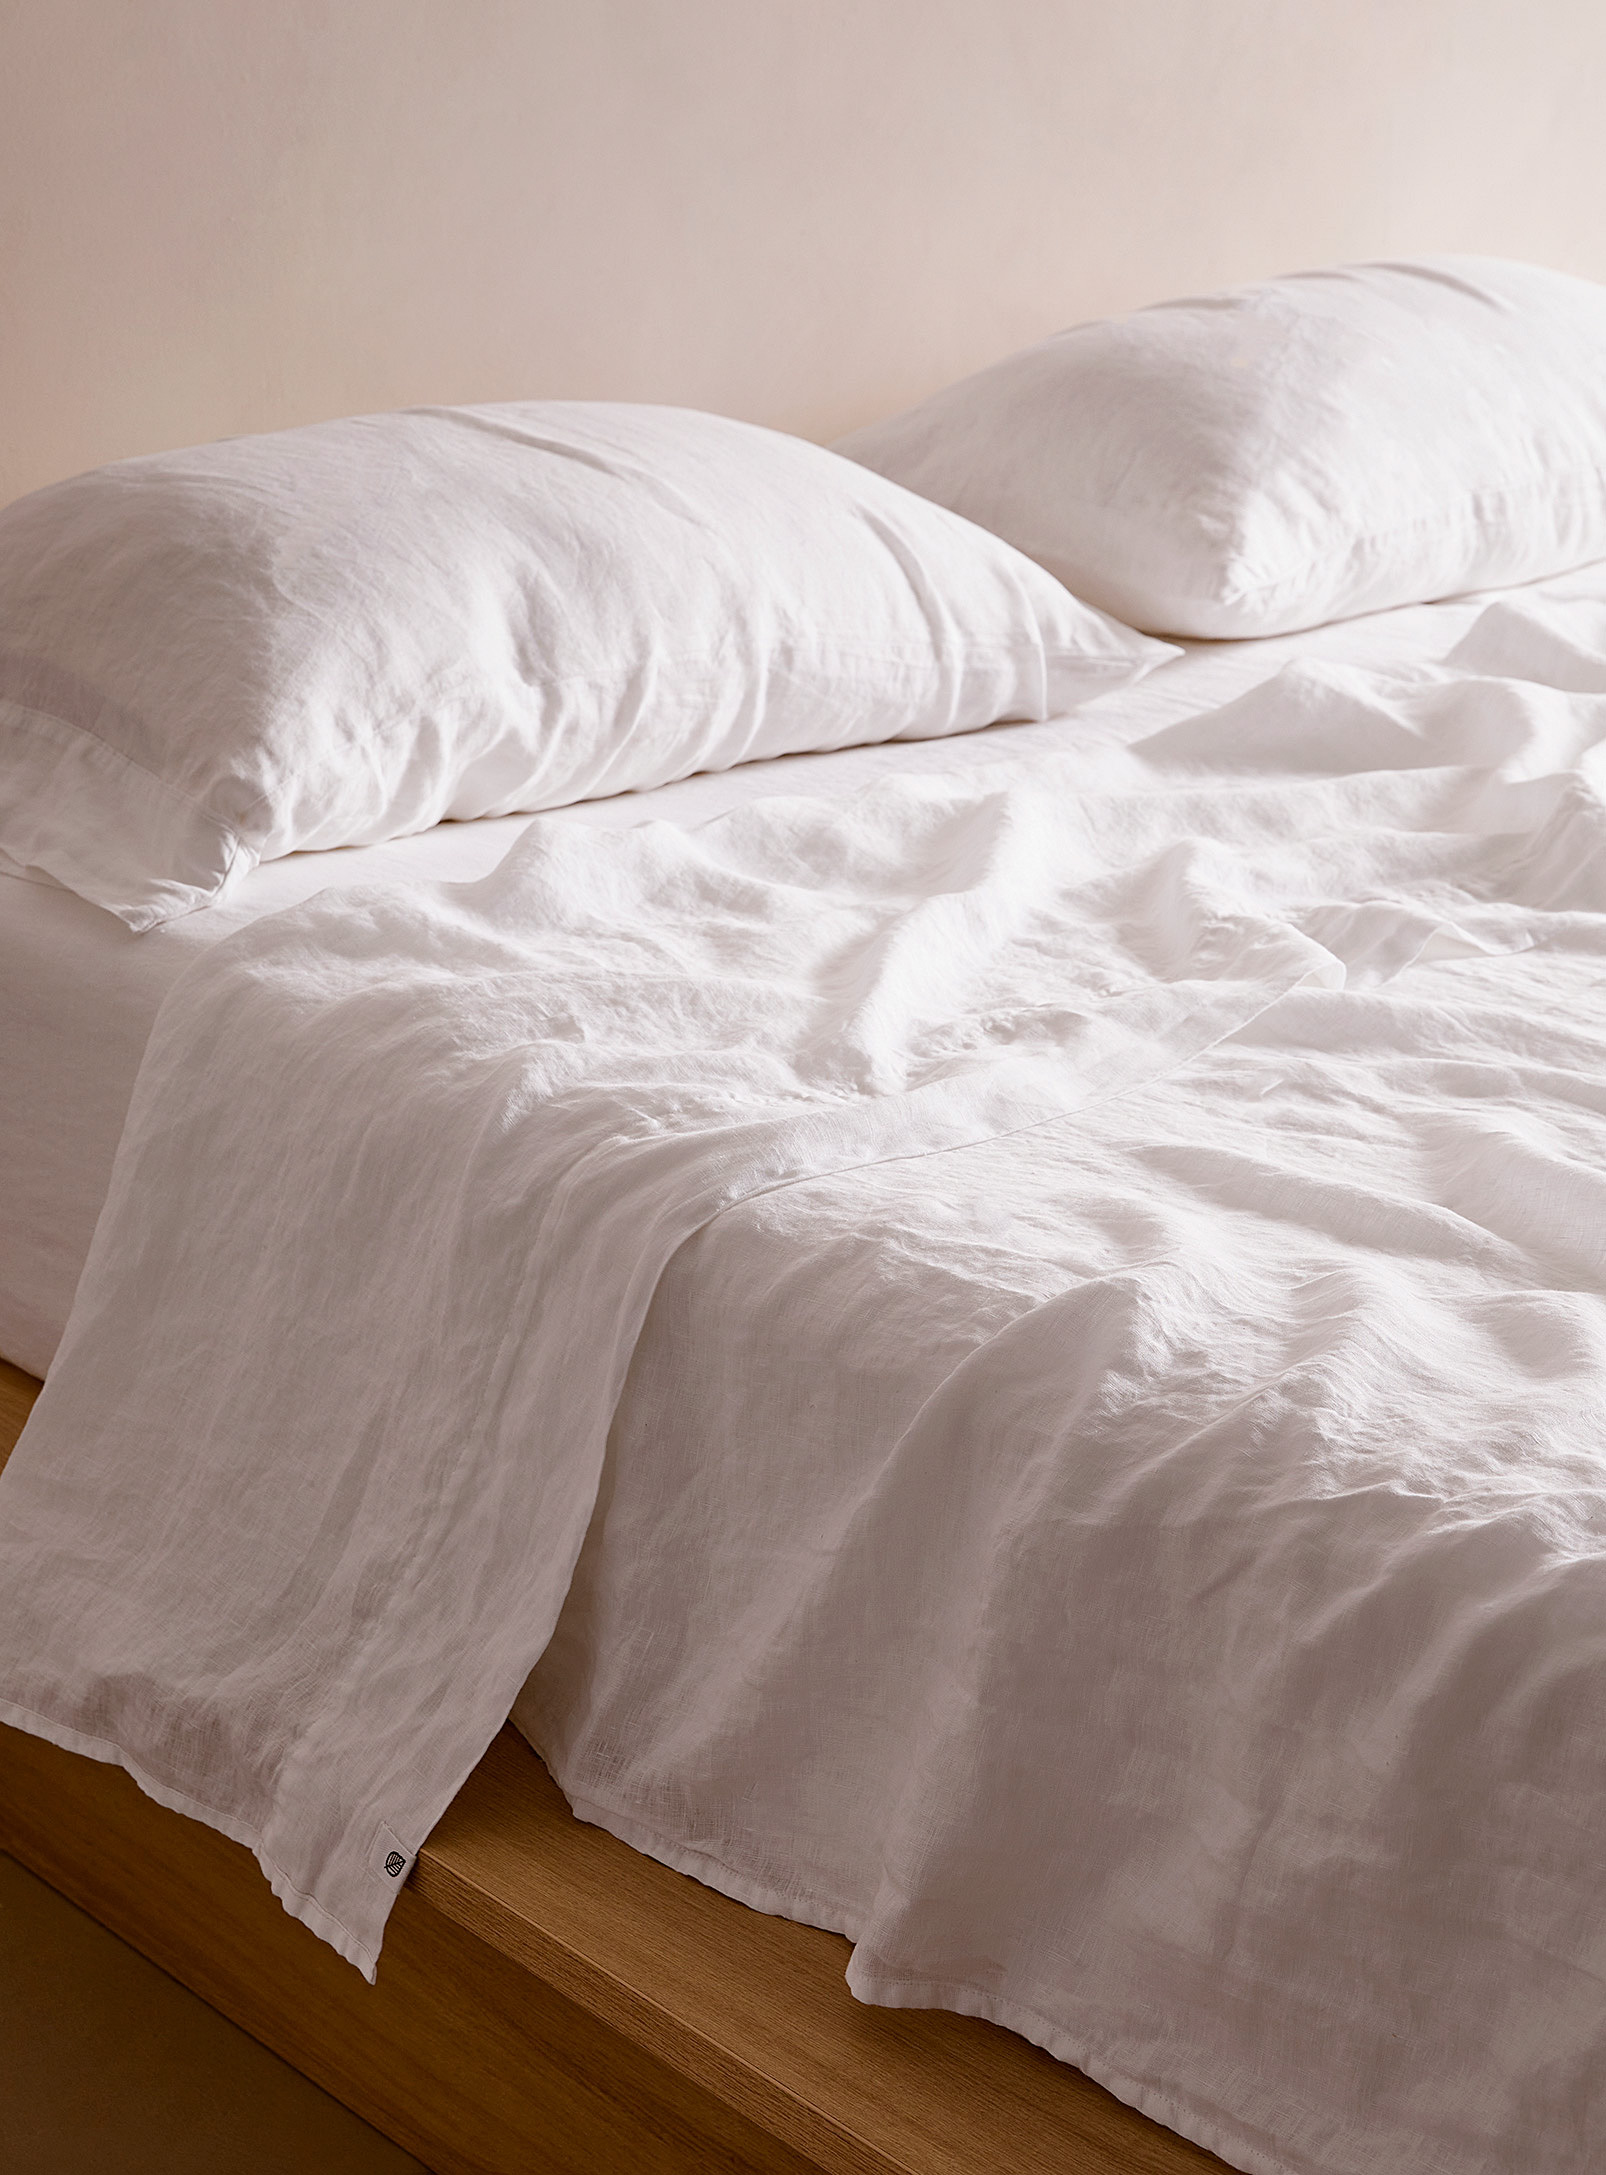 Simons Maison Solid Washed Linen Sheet Fits Mattresses Up To 16 In